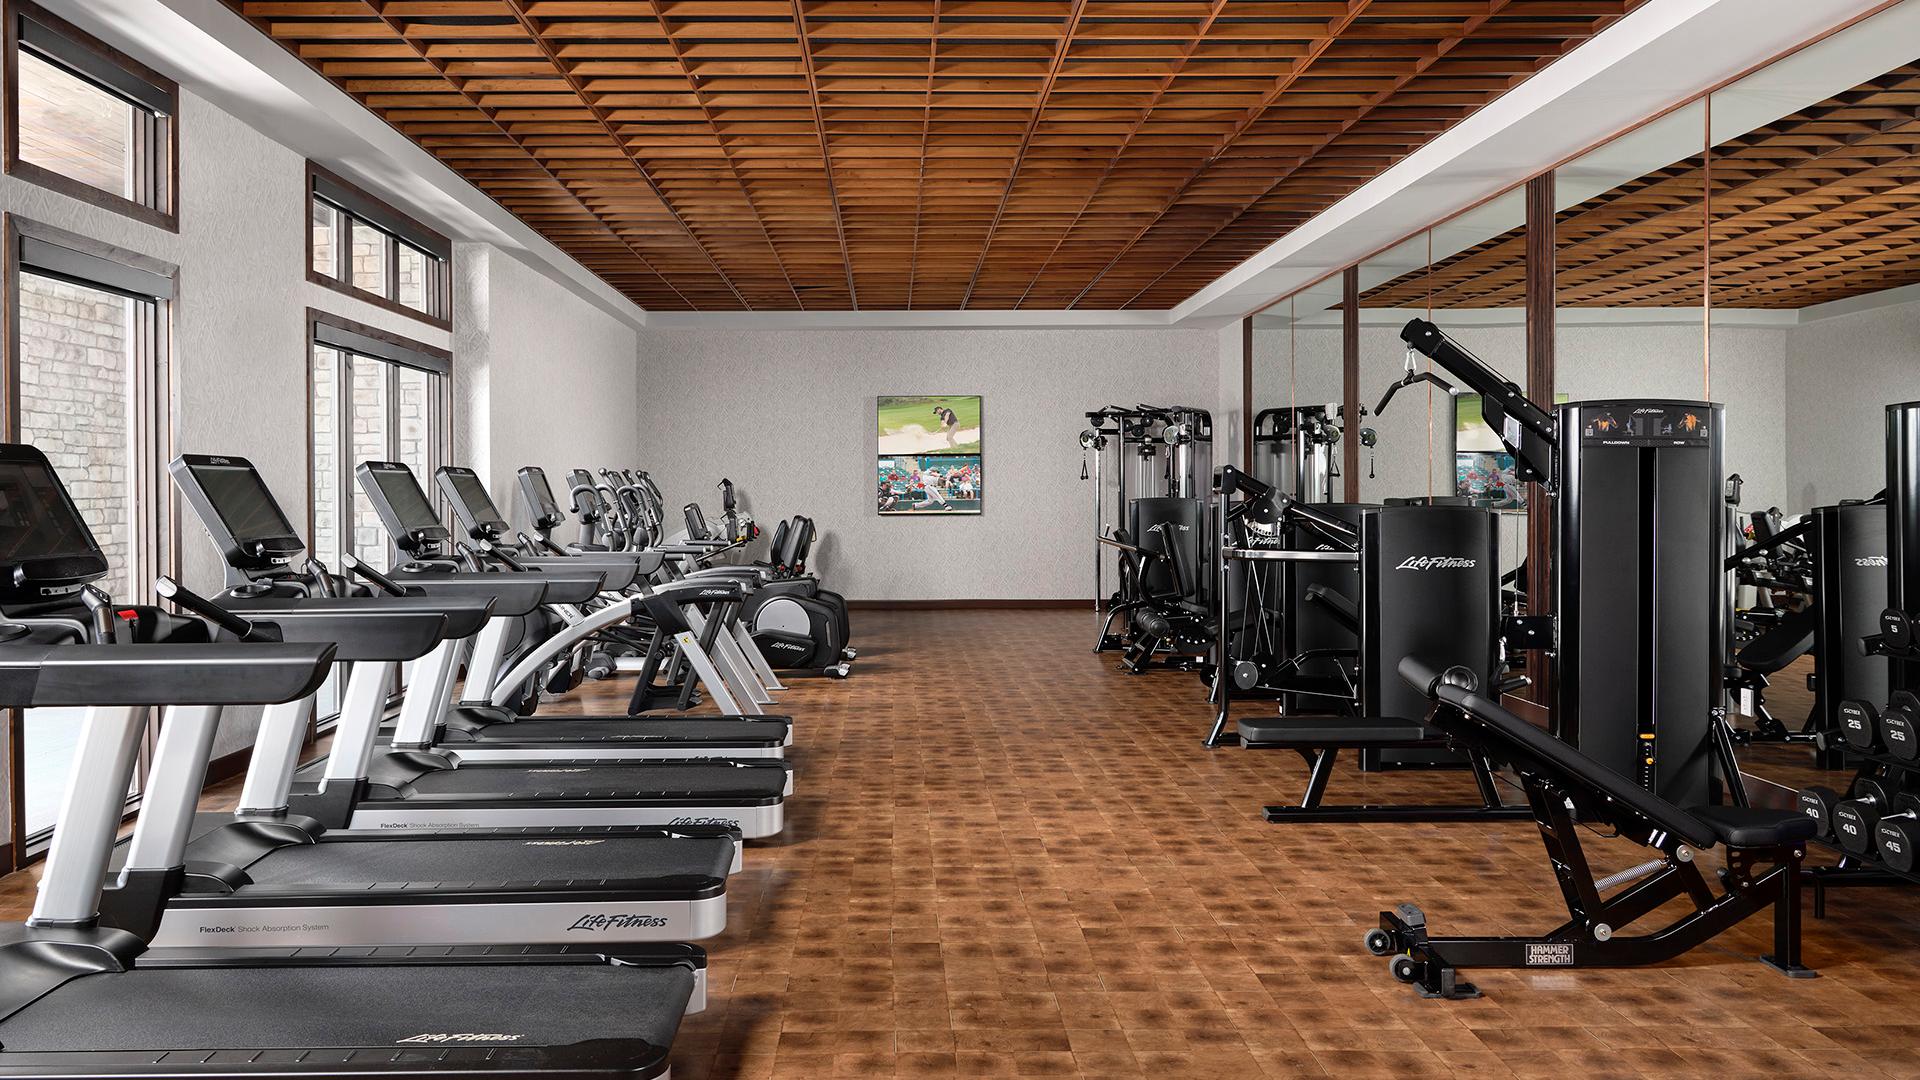 The community clubhouse features a state-of-the-art fitness center